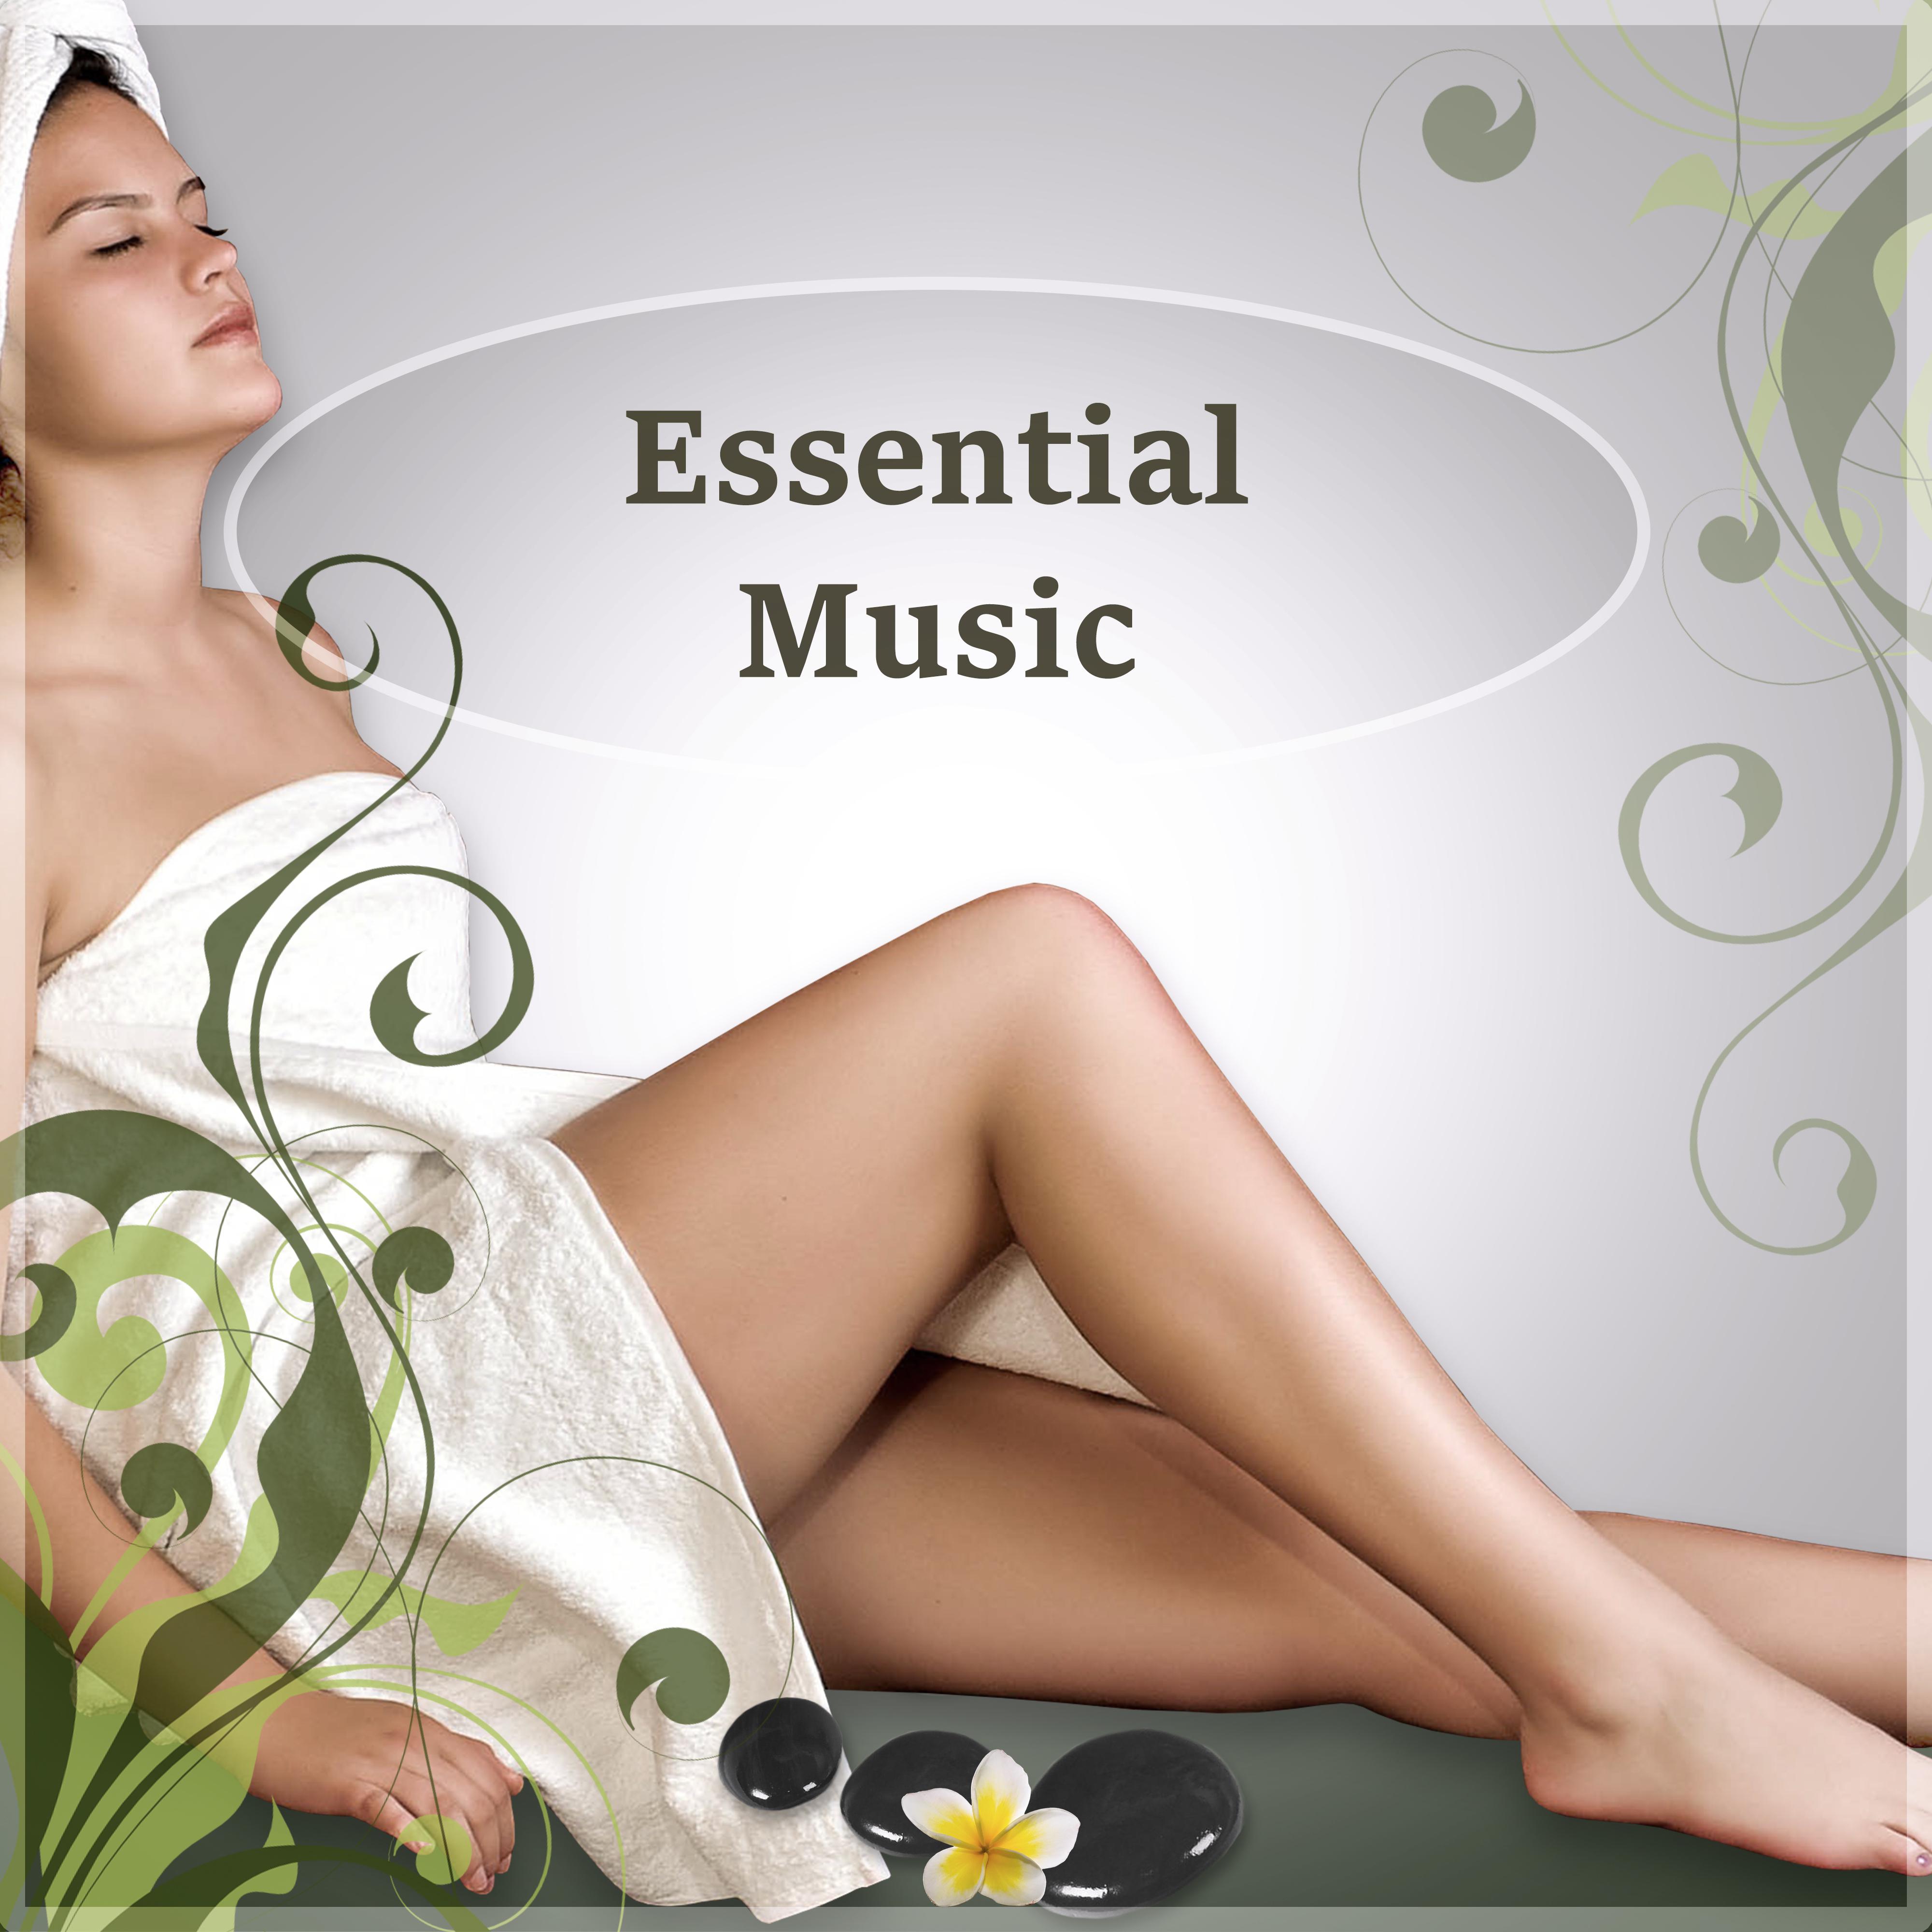 Essential Music - Massage & Spa Music, Serenity Relaxing Spa Music, Instrumental Music for Massage Therapy, Piano Music and Sounds of Nature Music for Relaxation, New Age Reiki